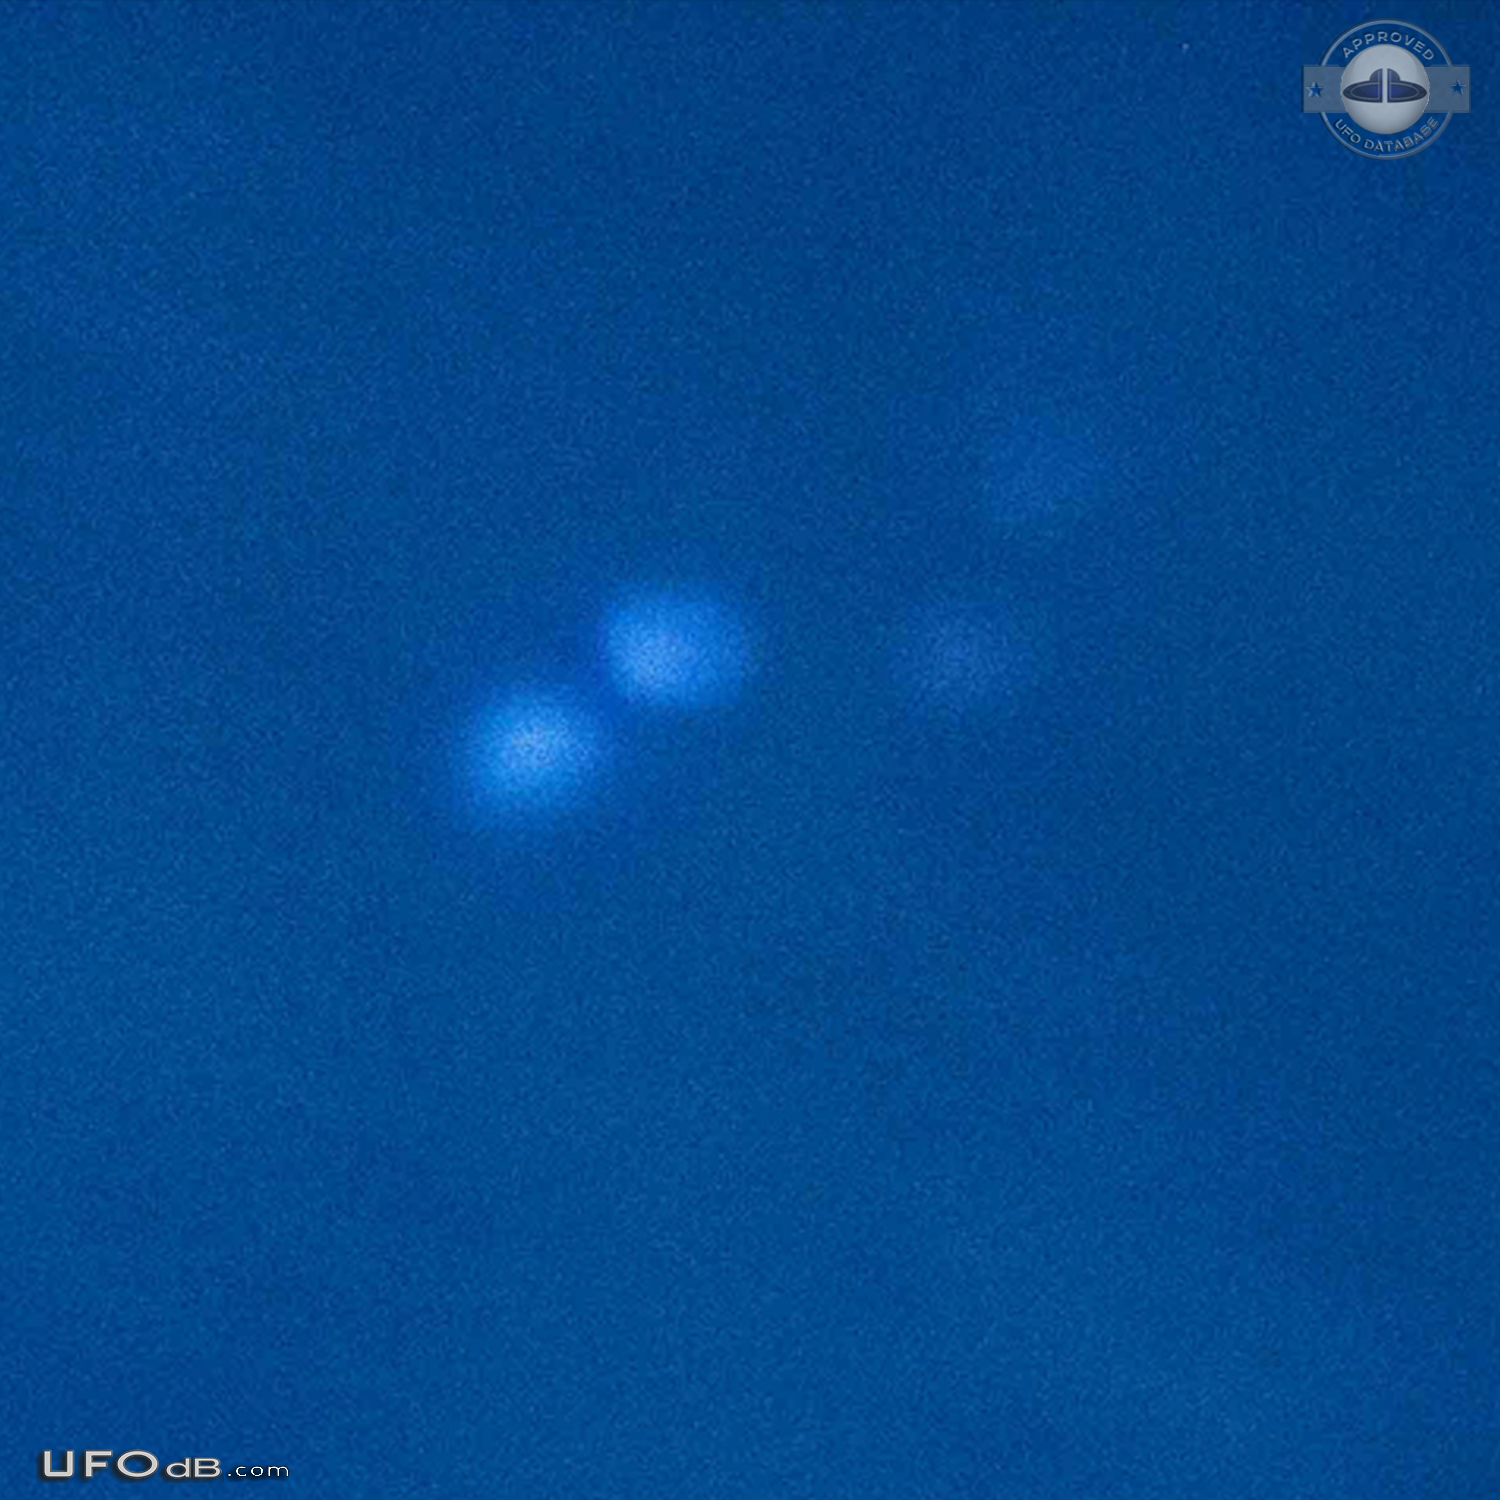 UFO light coming from inside clouds, circle shape. Blinking Pszczyna P UFO Picture #799-3